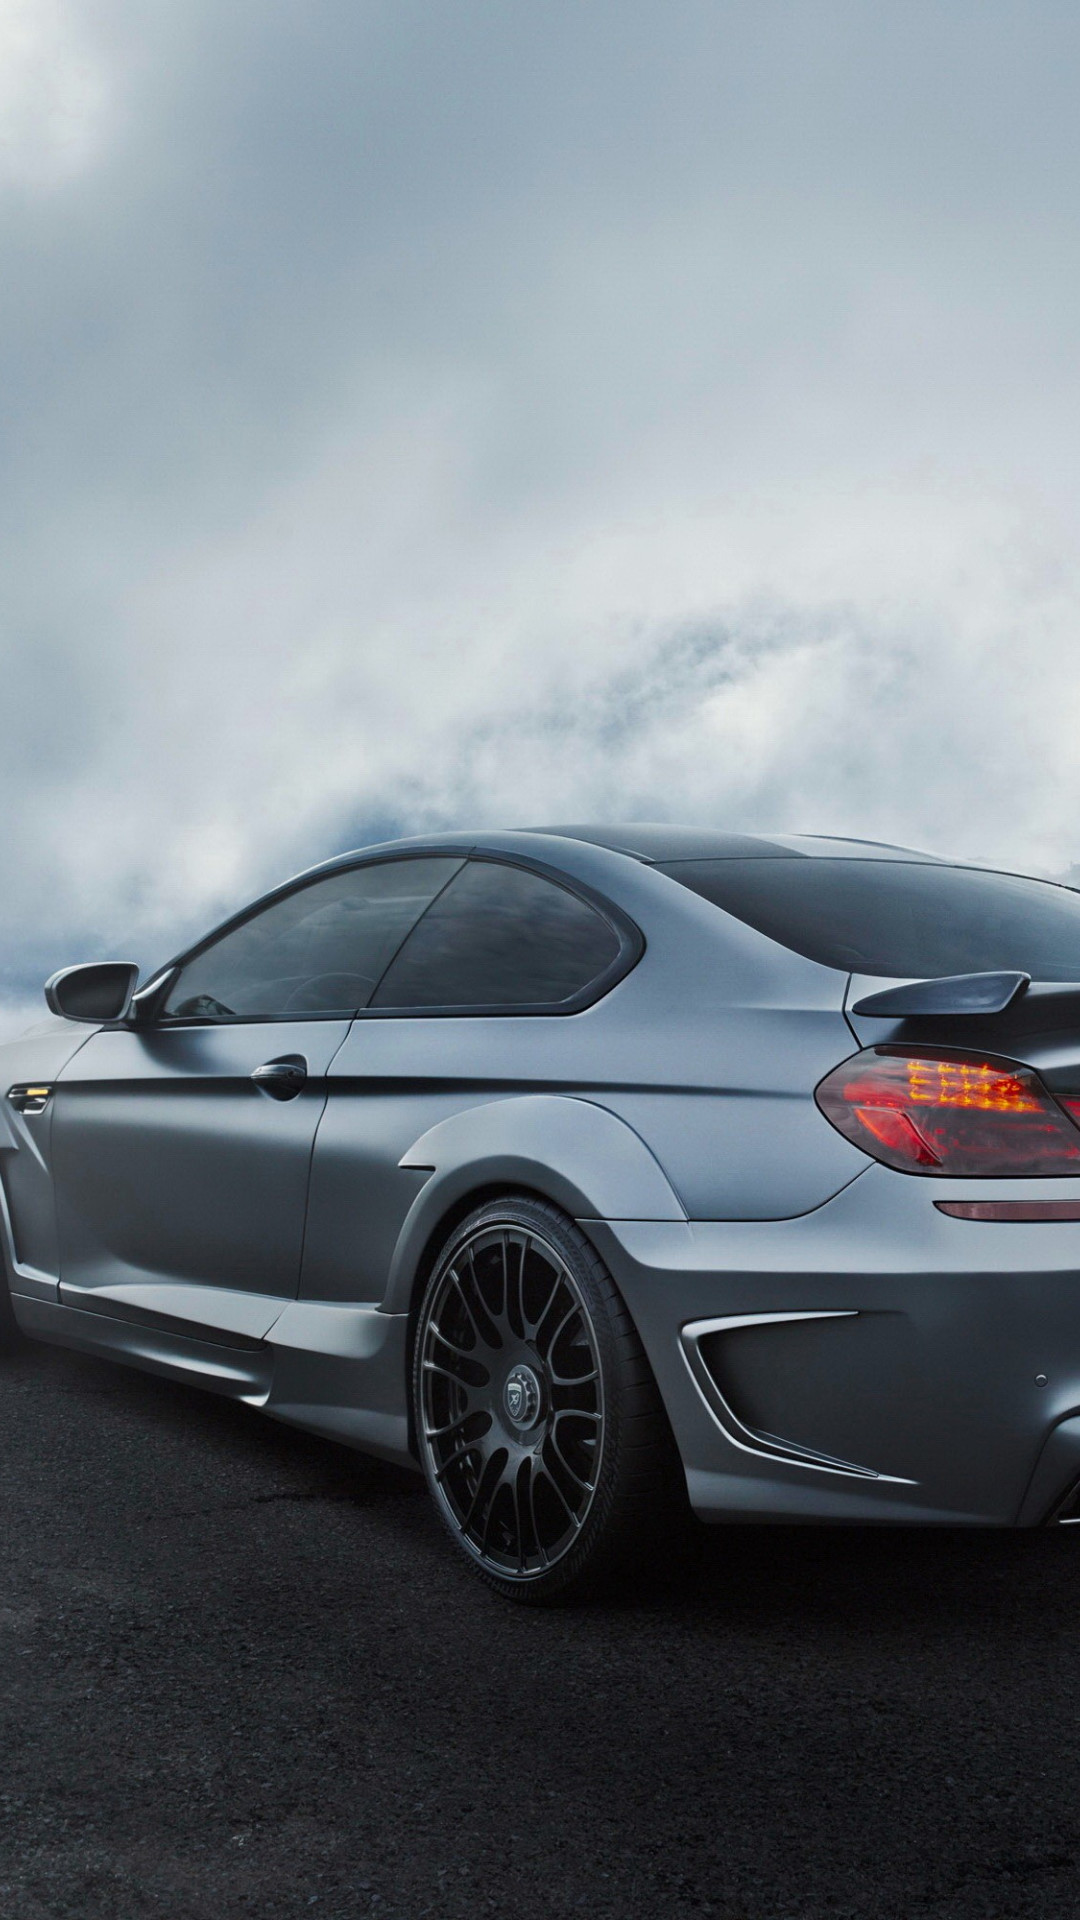 Bmw Iphone Wallpapers Free Download - Bmw M6 2017 Hd - HD Wallpaper 